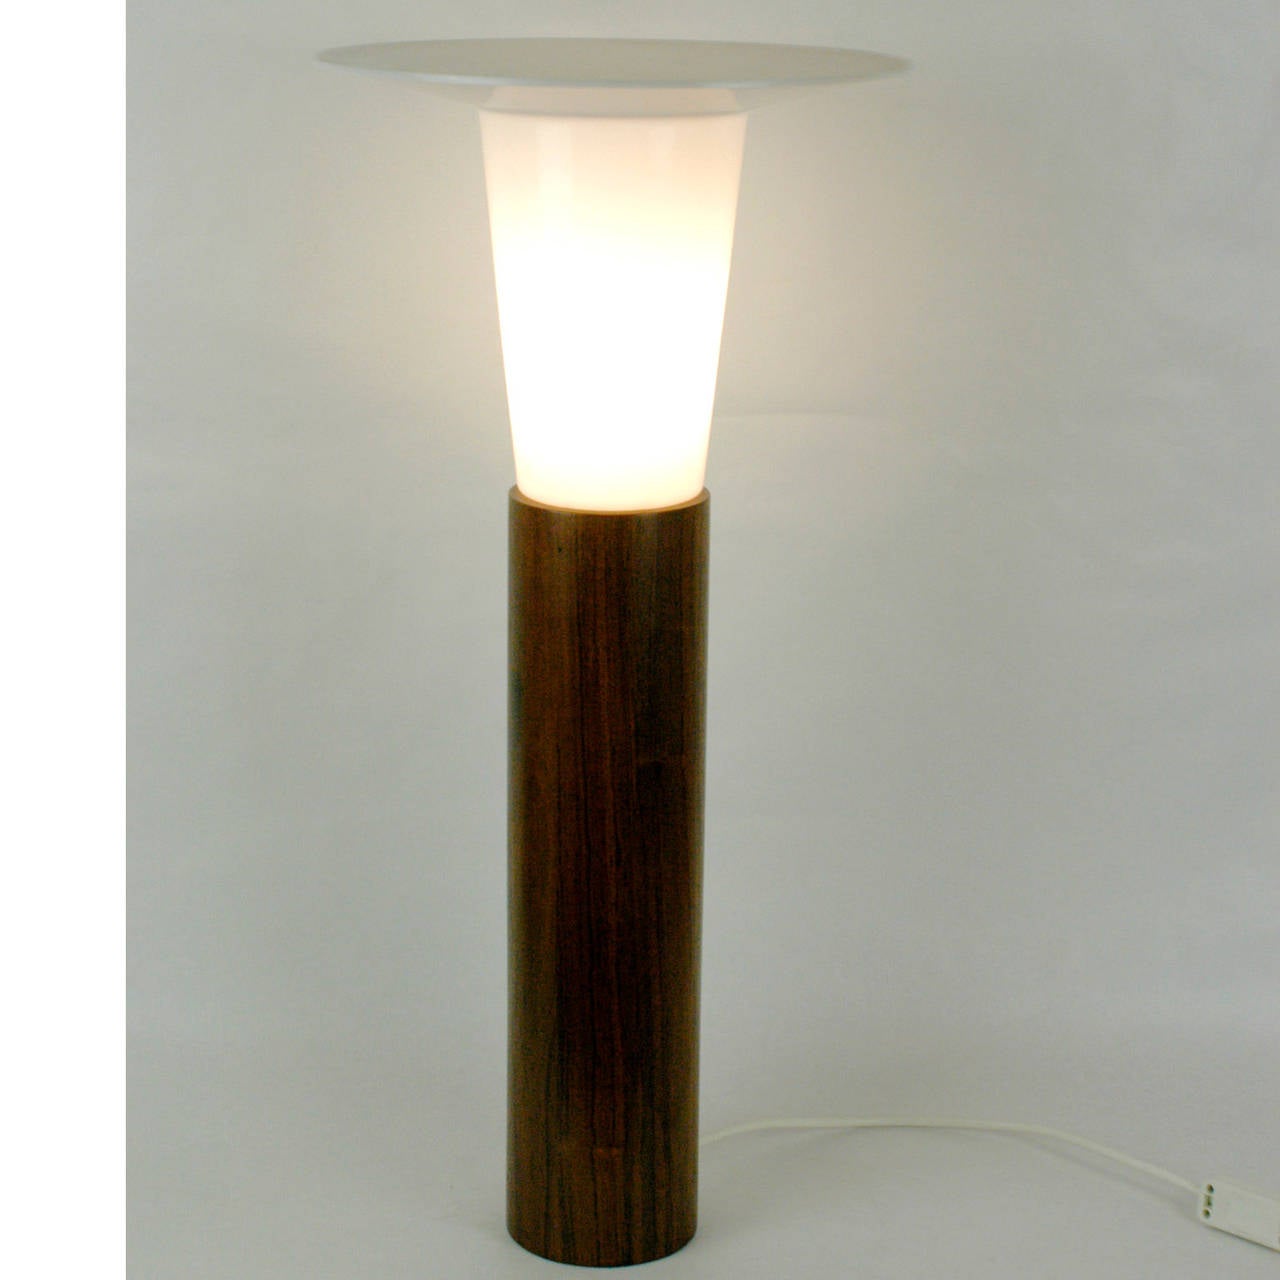 Mid-20th Century Scandinavian Modern Rosewood Table Lamp by U. and O. Kristiansson for Luxus